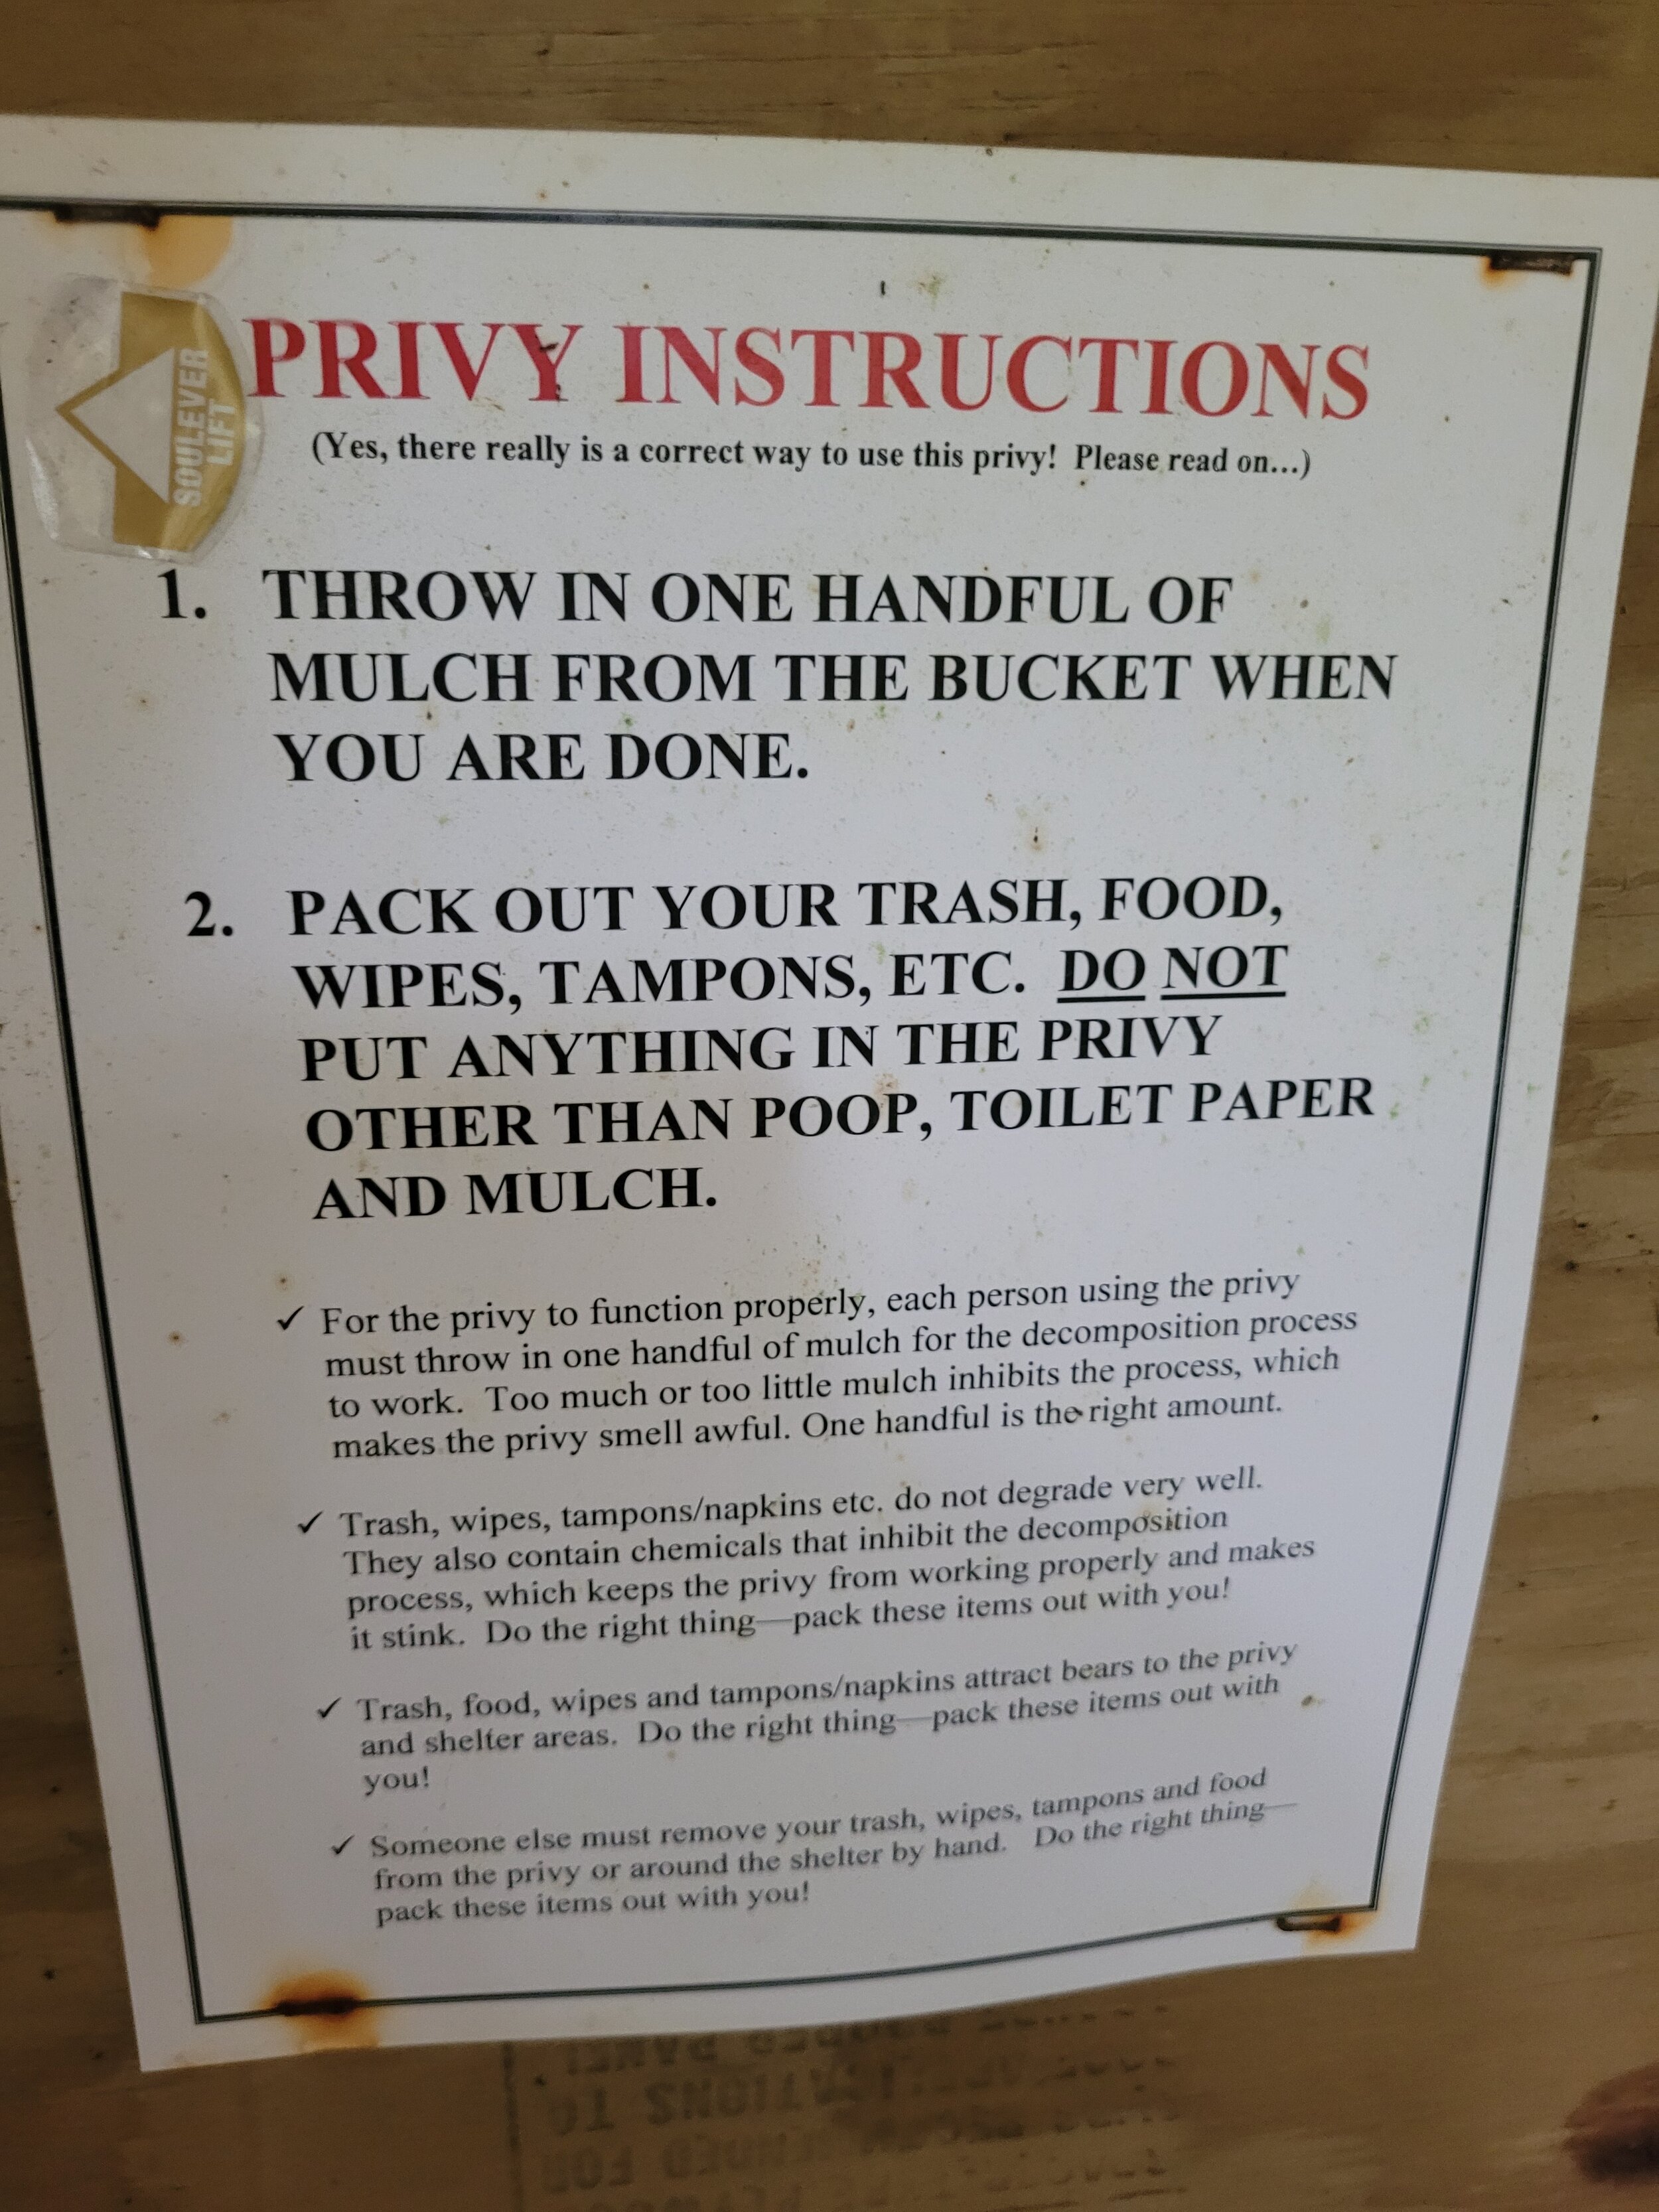 How to use a privy